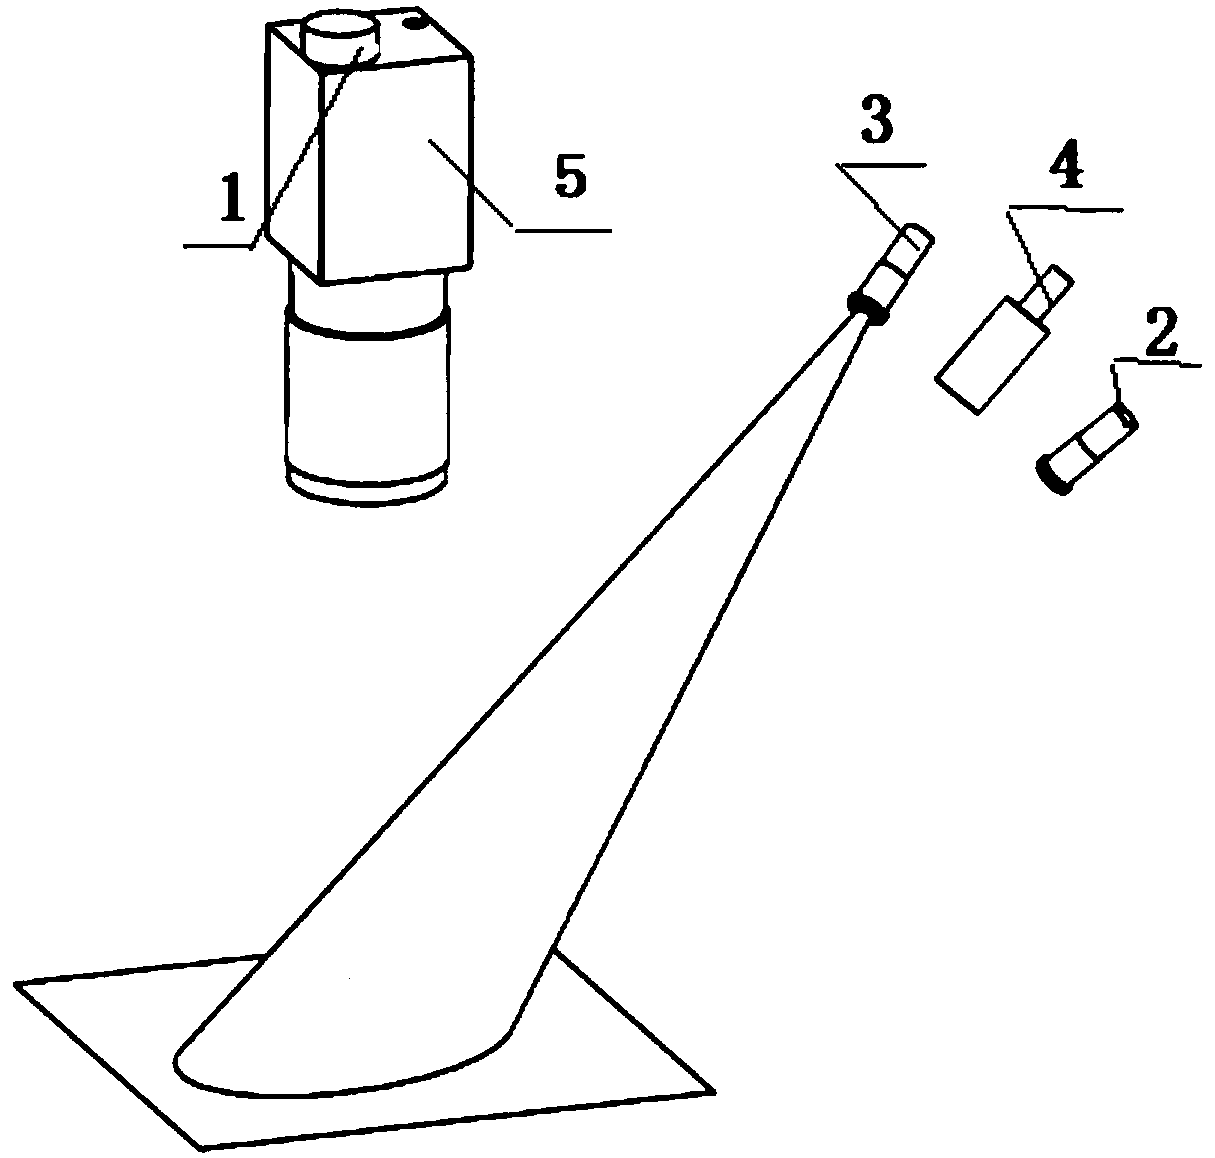 Welding stud position detection device and method based on silhouette technology